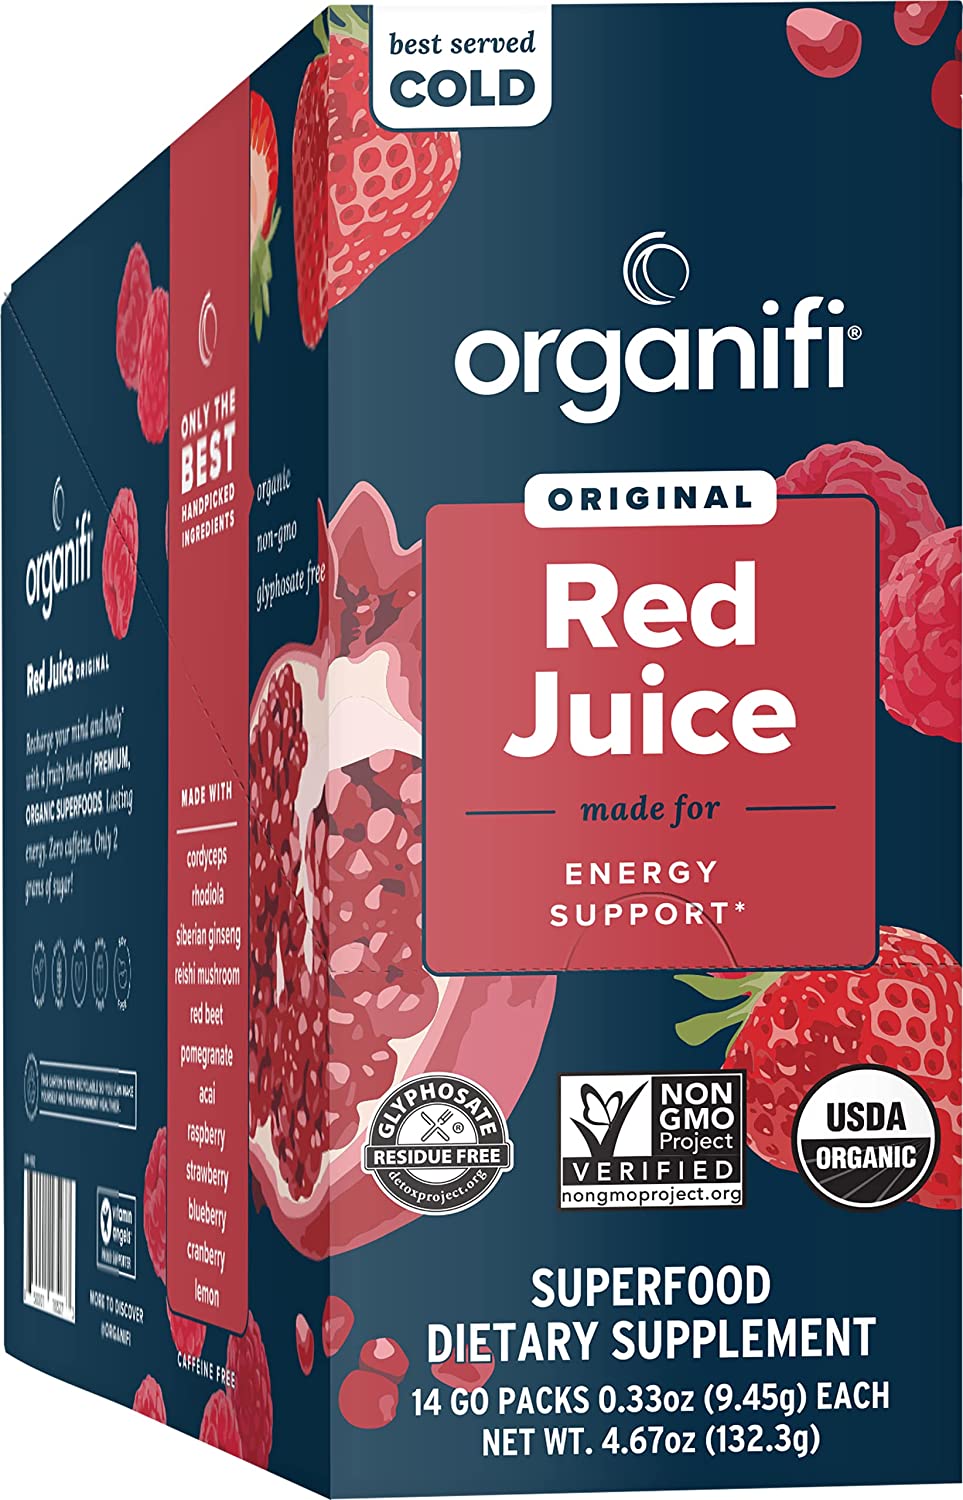 The front and side of a Red Juice Go Pack box